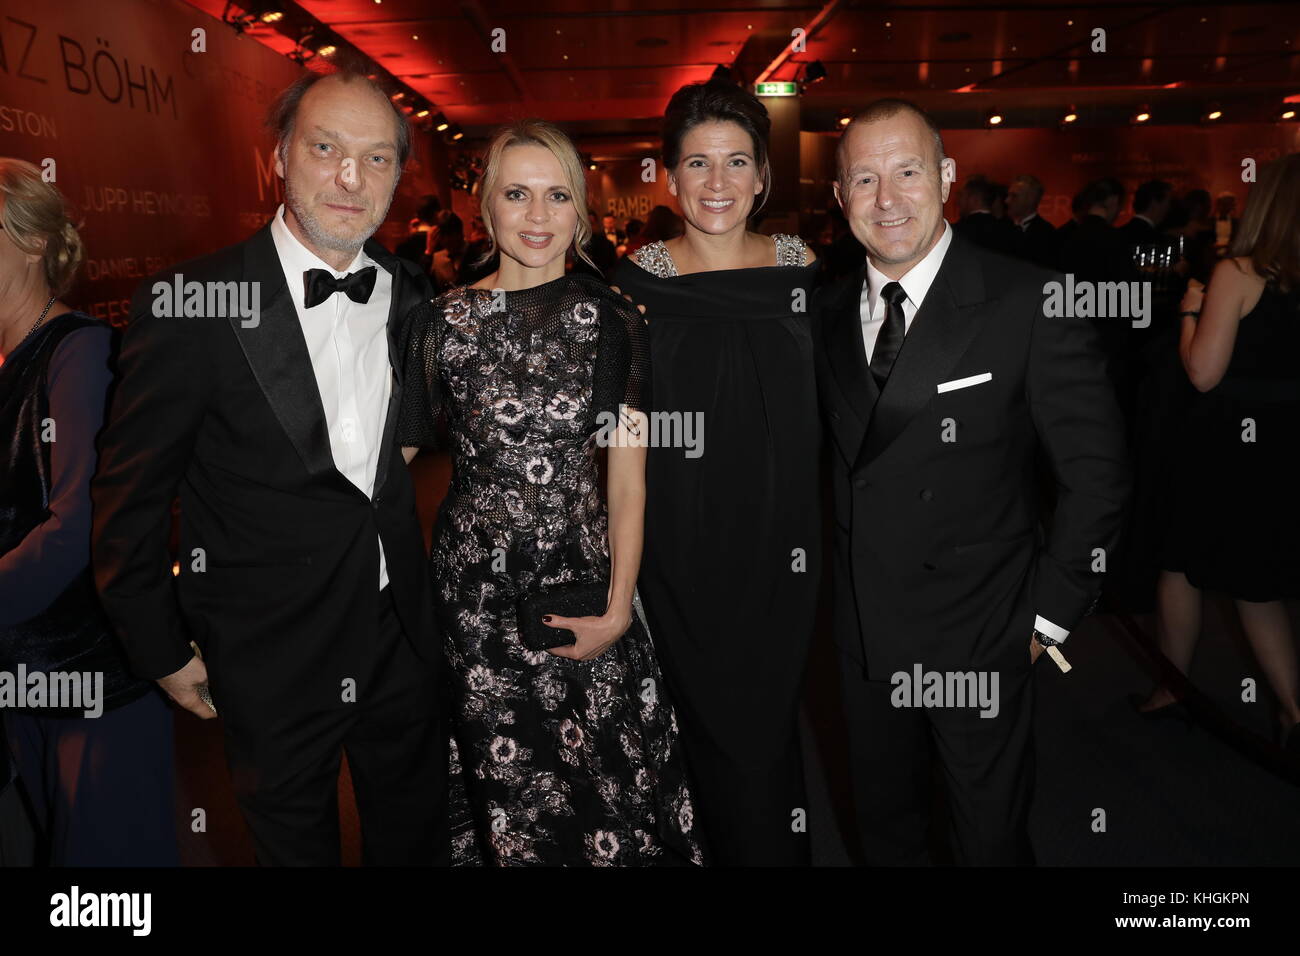 Berlin, Germany. 16th Nov, 2017. Actor Heino Ferch (R) and his wife, equestrian athlete Marie-Jeanette Ferch (2-R) arrive for the 69th Bambi Award Ceremony in Berlin, Germany, 16 November 2017. Next to them are actor Martin Brambach and his partner the actress Christine Sommer. Credit: Jörg Carstensen/dpa/Alamy Live News Stock Photo